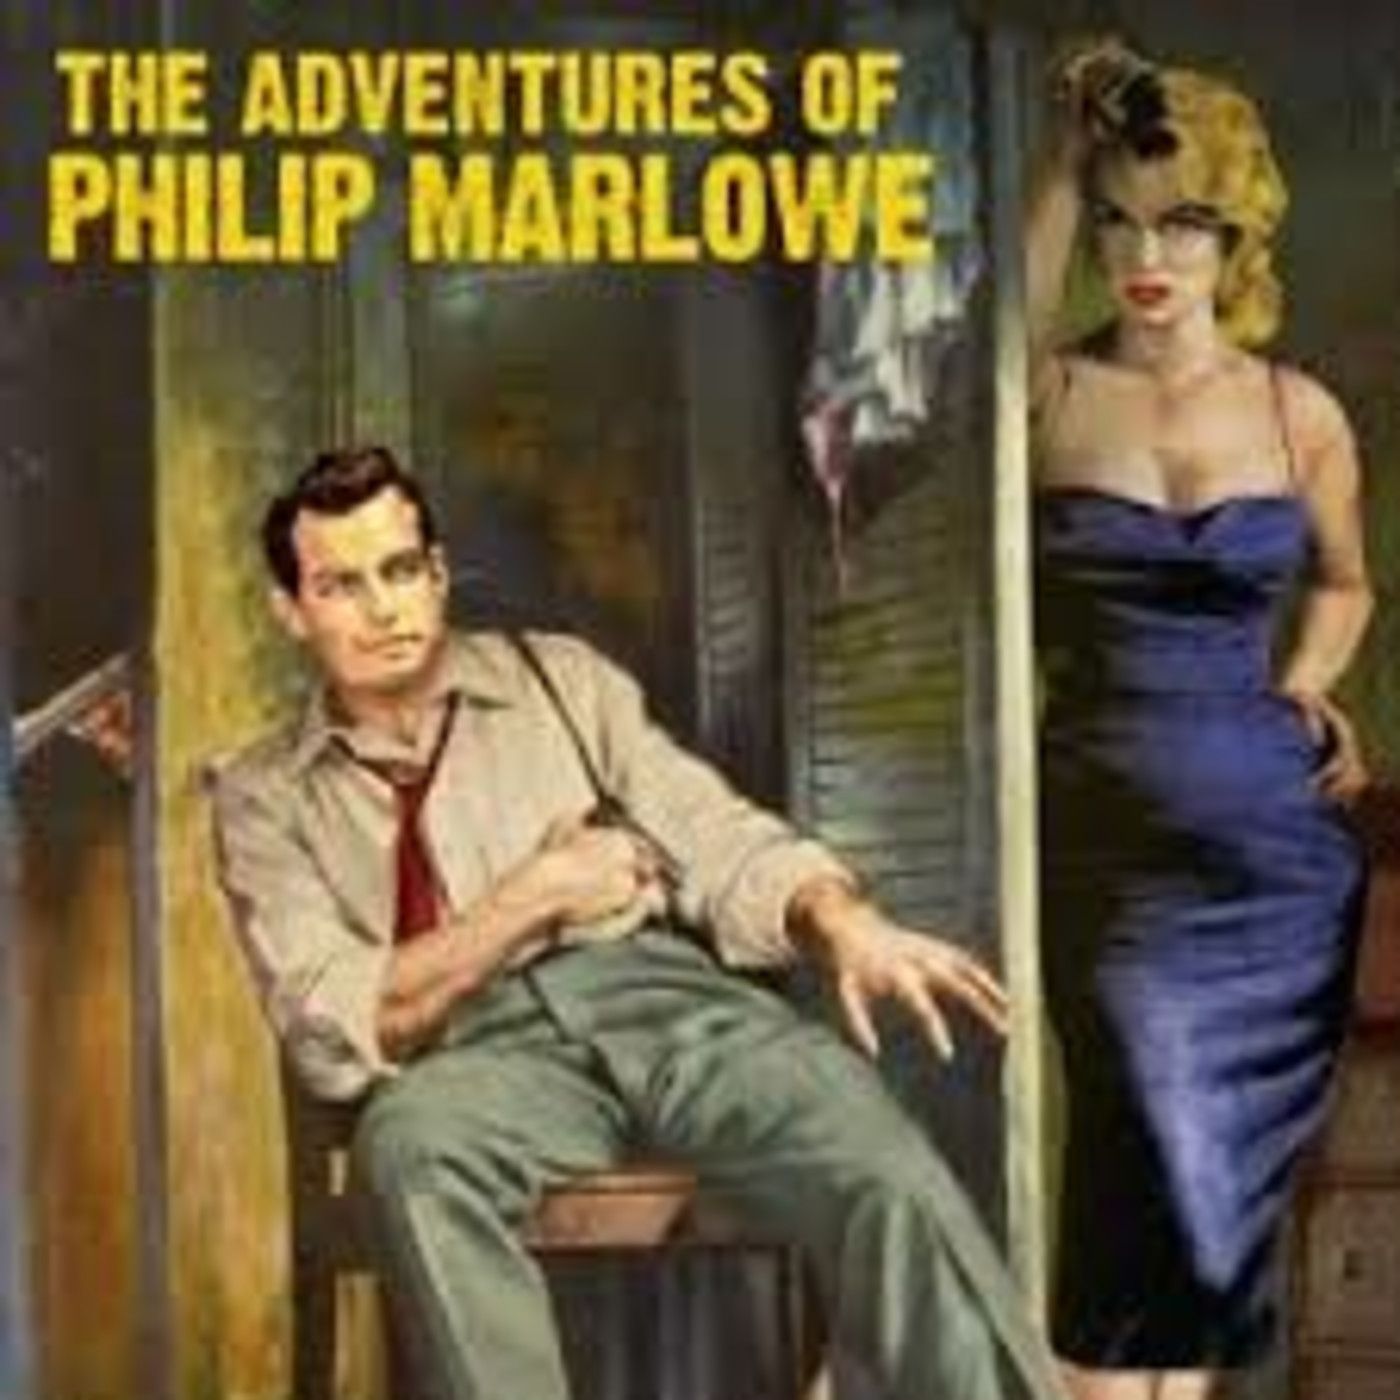 The Adventures of Philip Marlowe - The Big Step